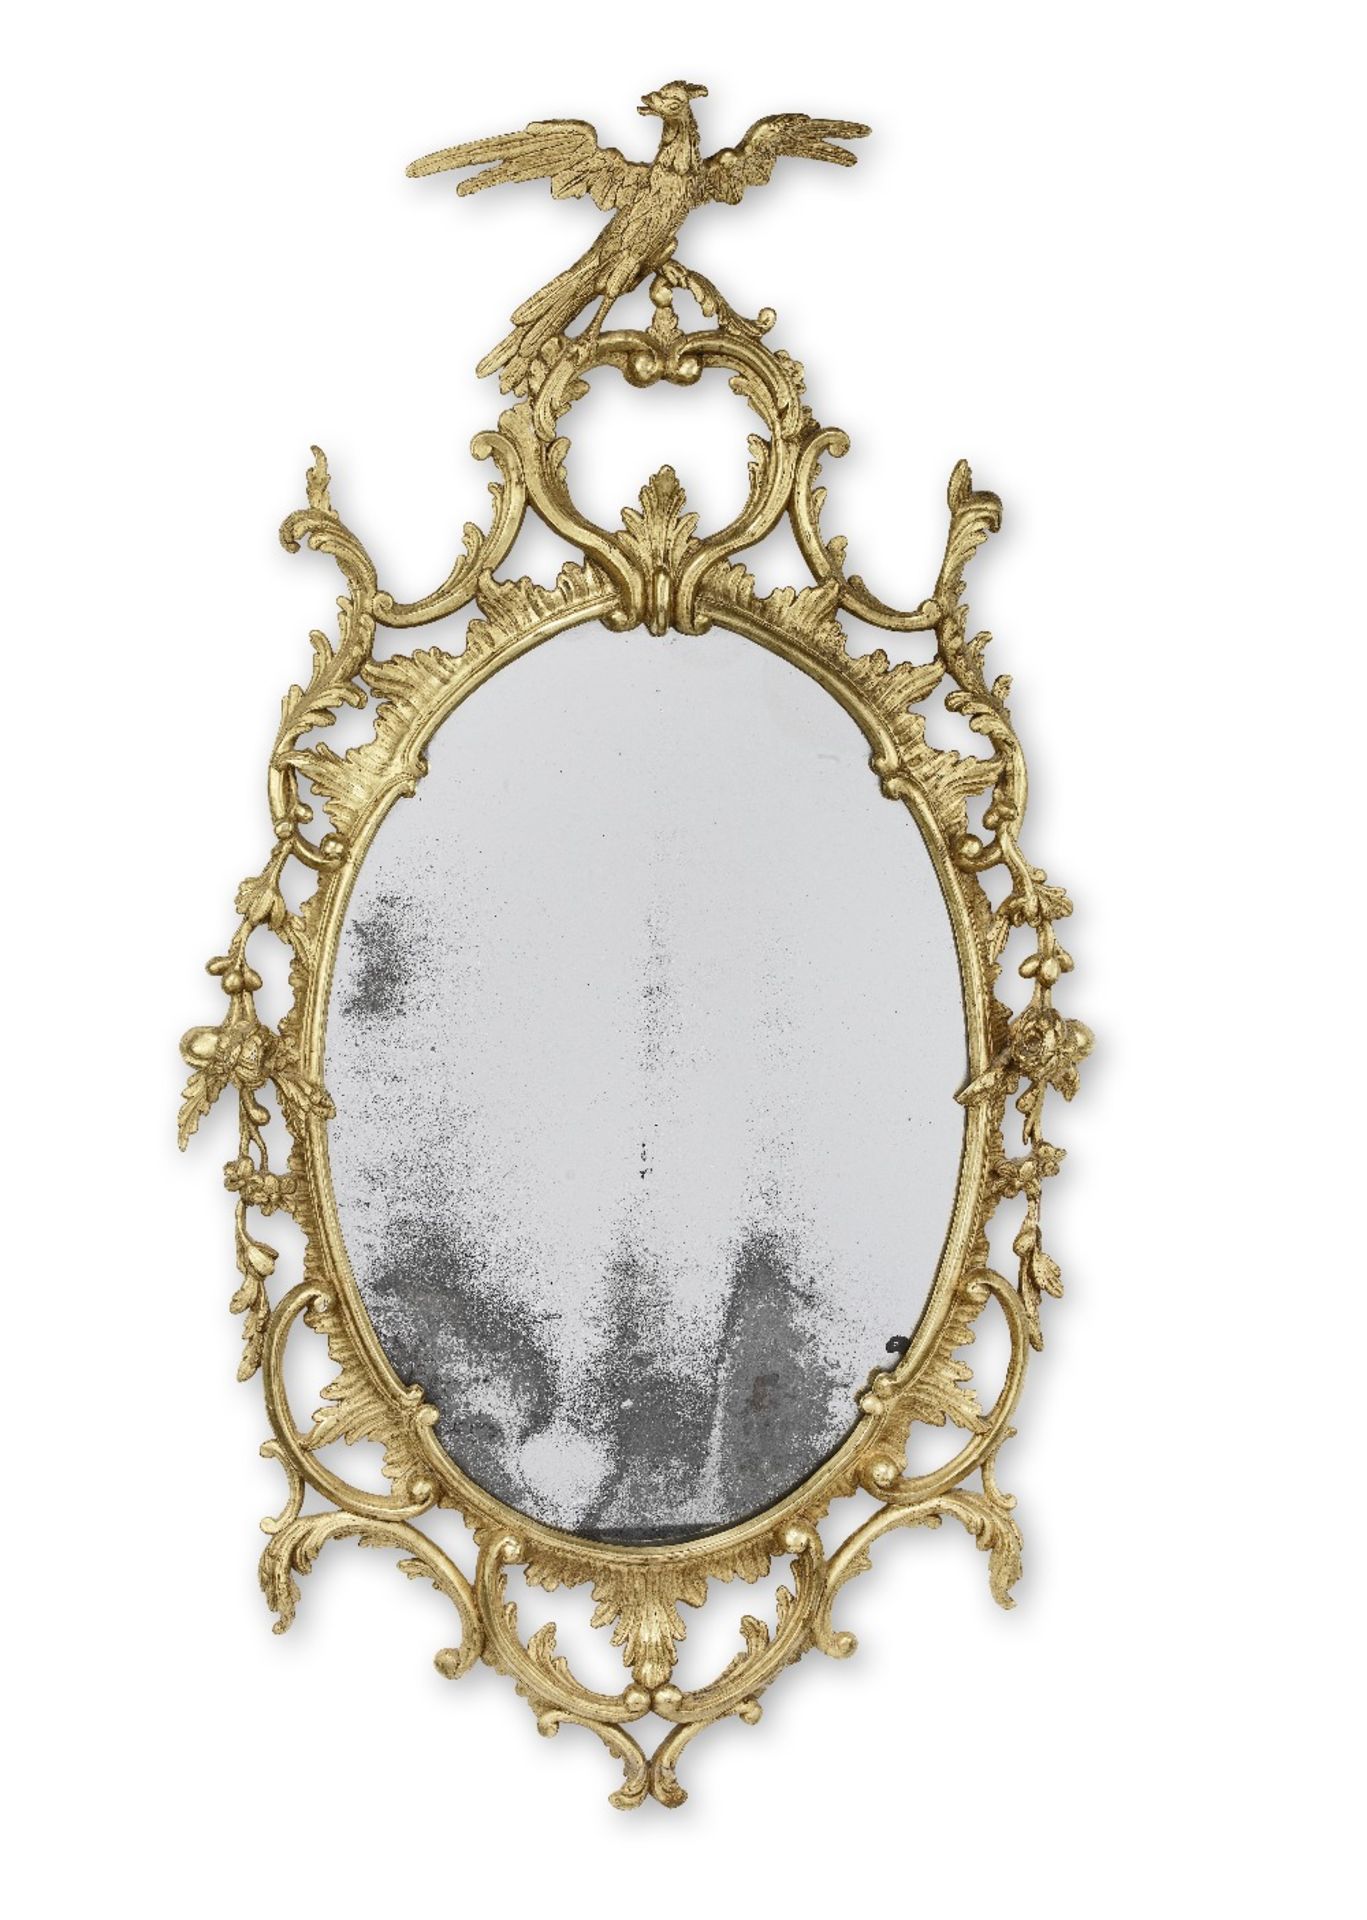 A George III giltwood mirror probably restored and/or re-gilded by John Hay and Son during the 1...